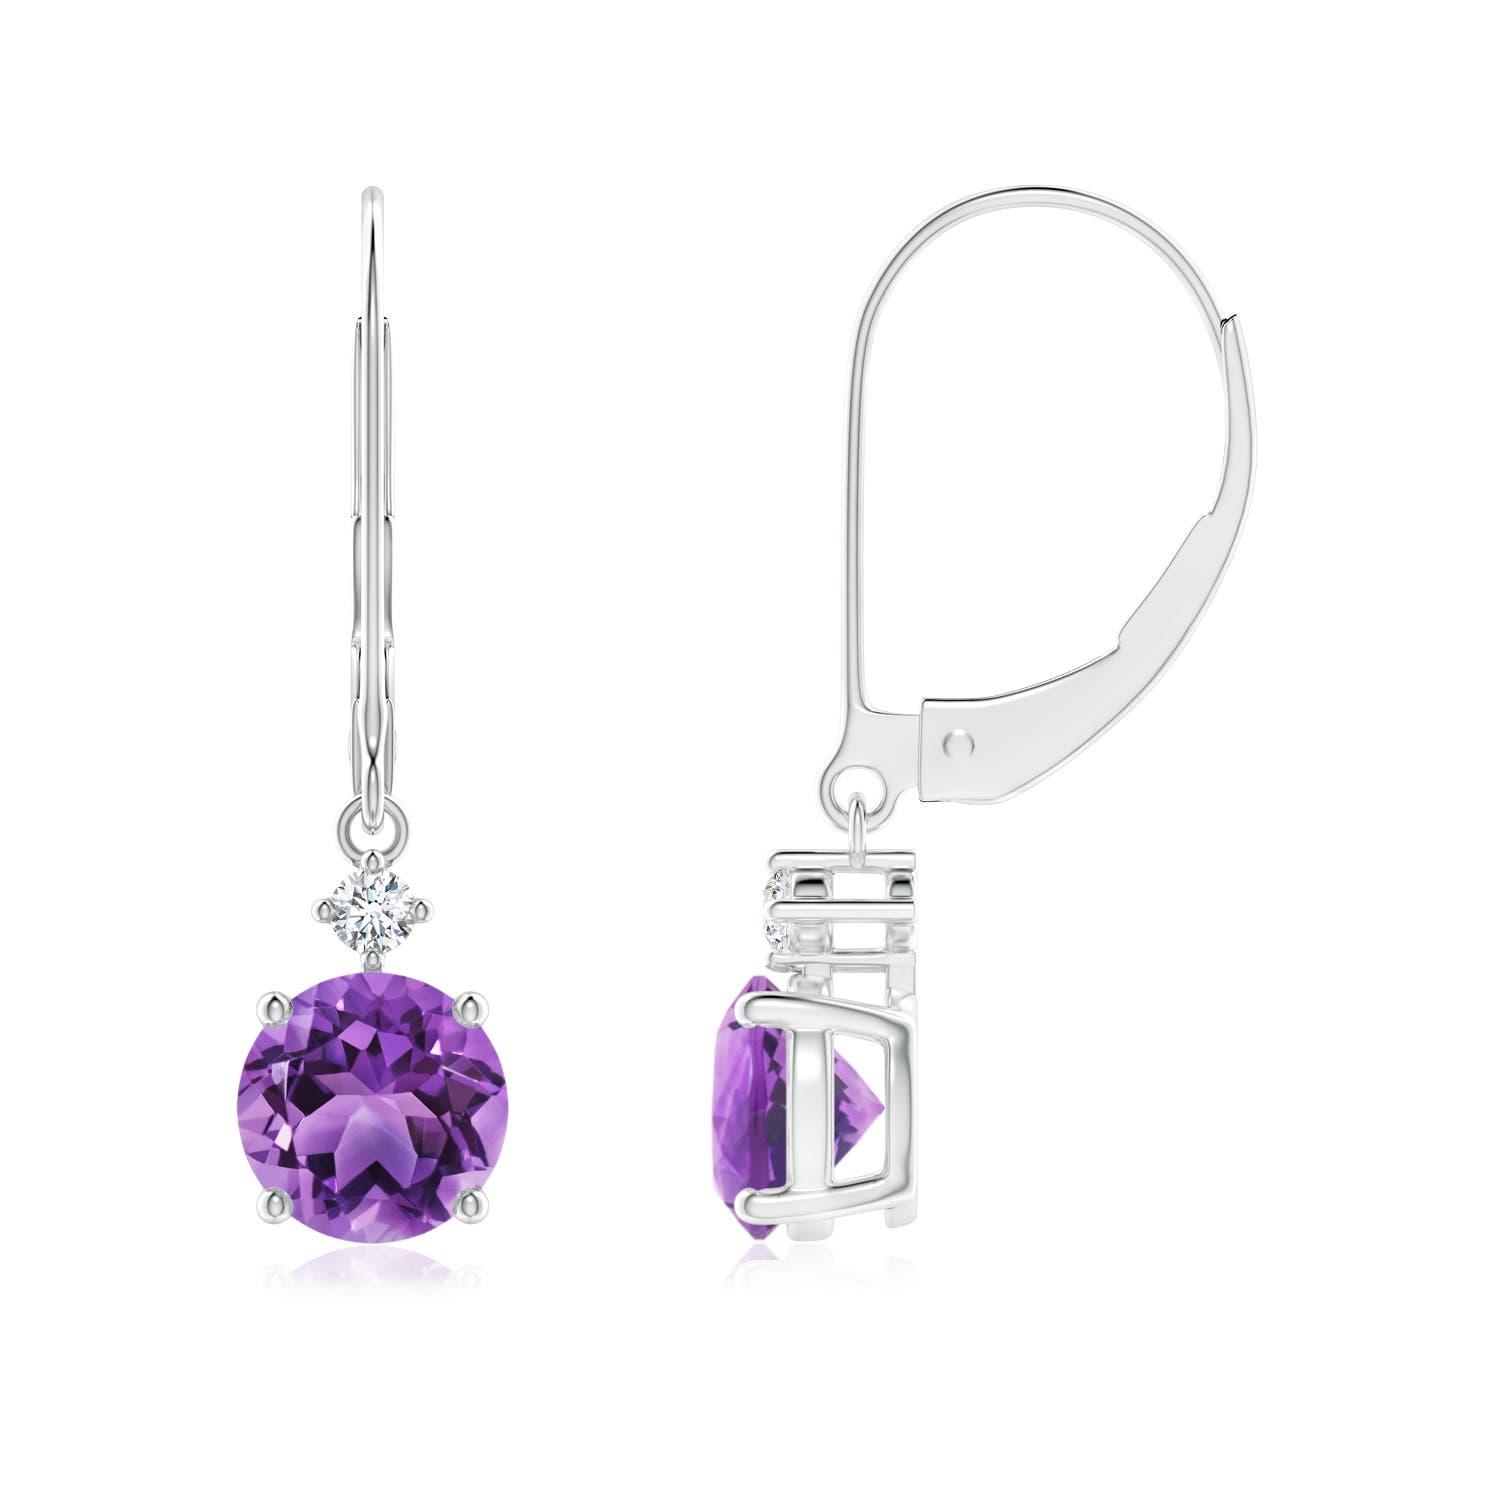 AA - Amethyst / 1.65 CT / 14 KT White Gold